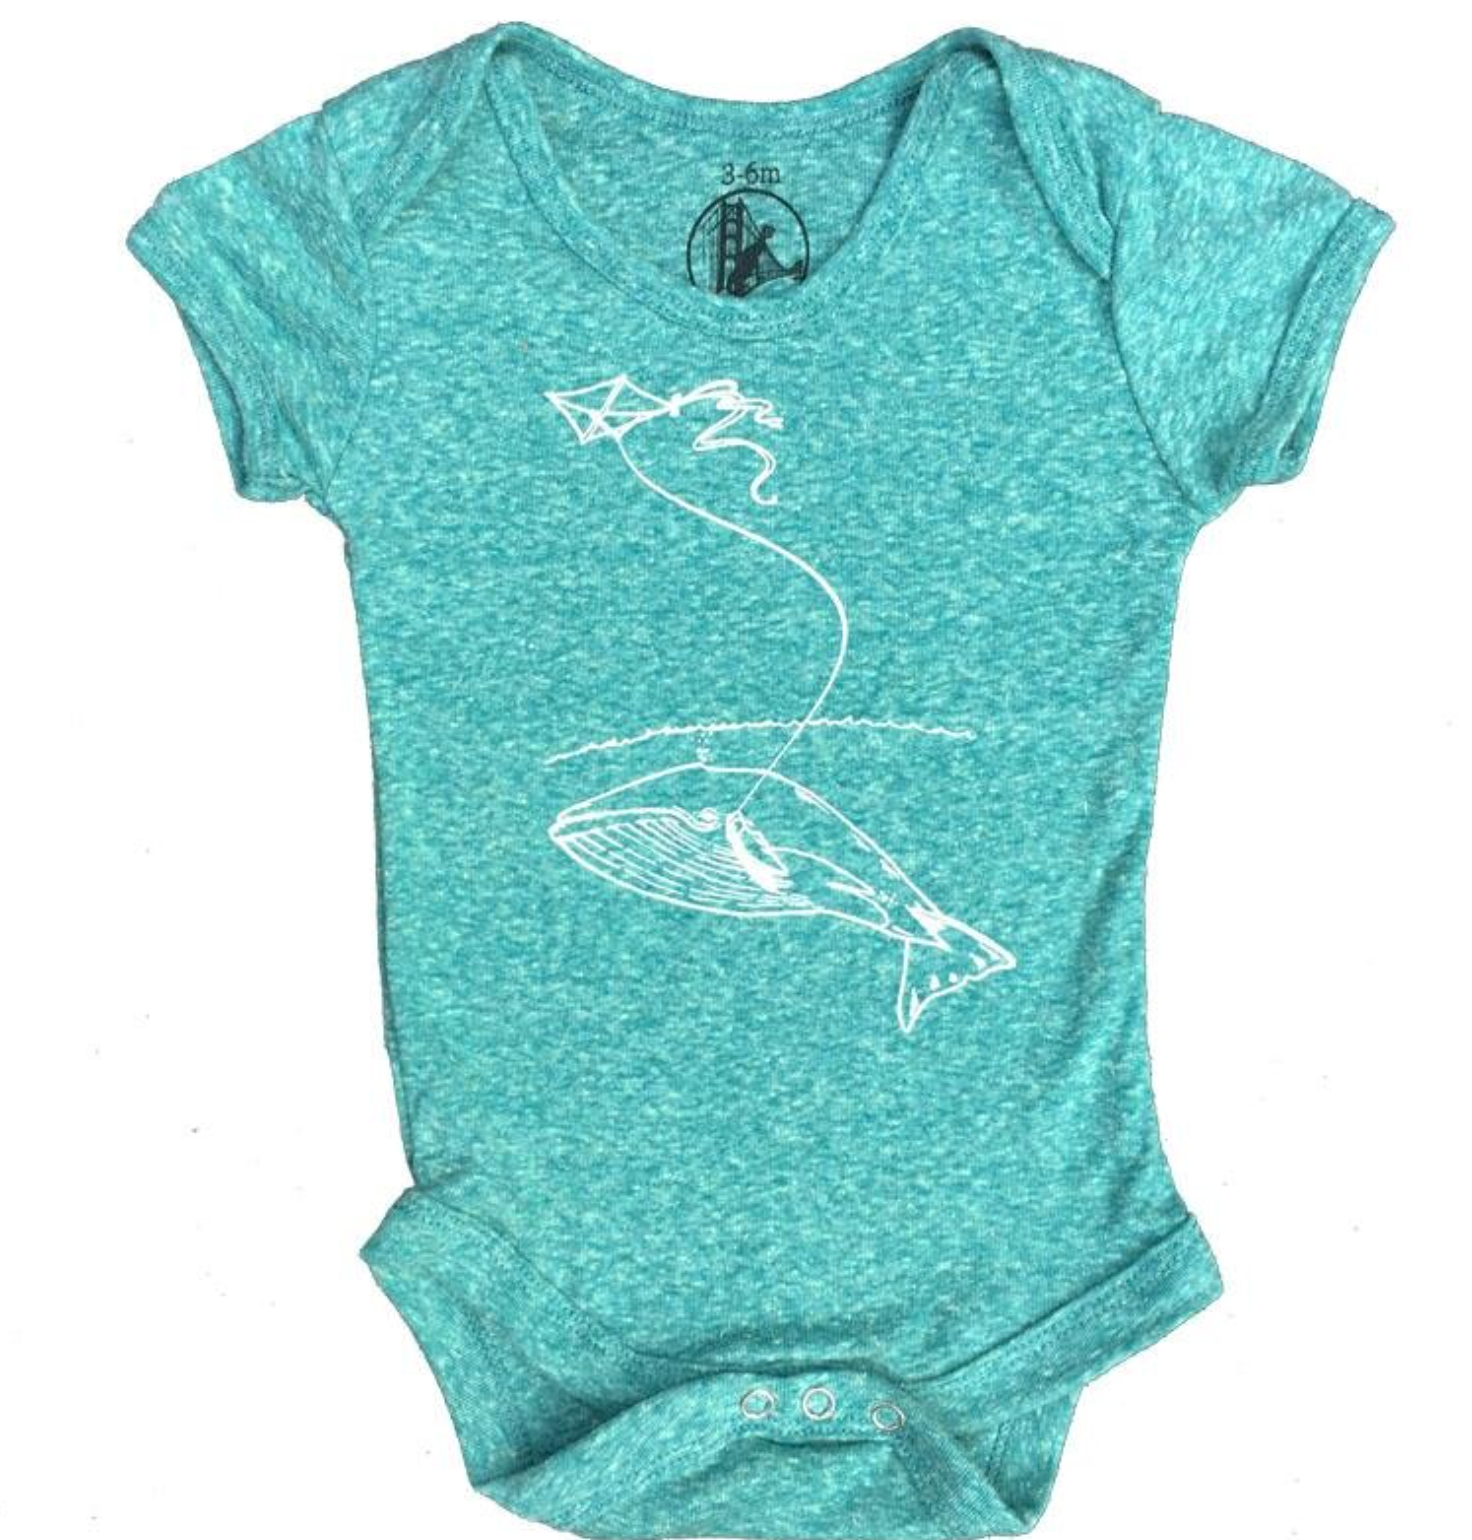 Onesie - Whale and Kite